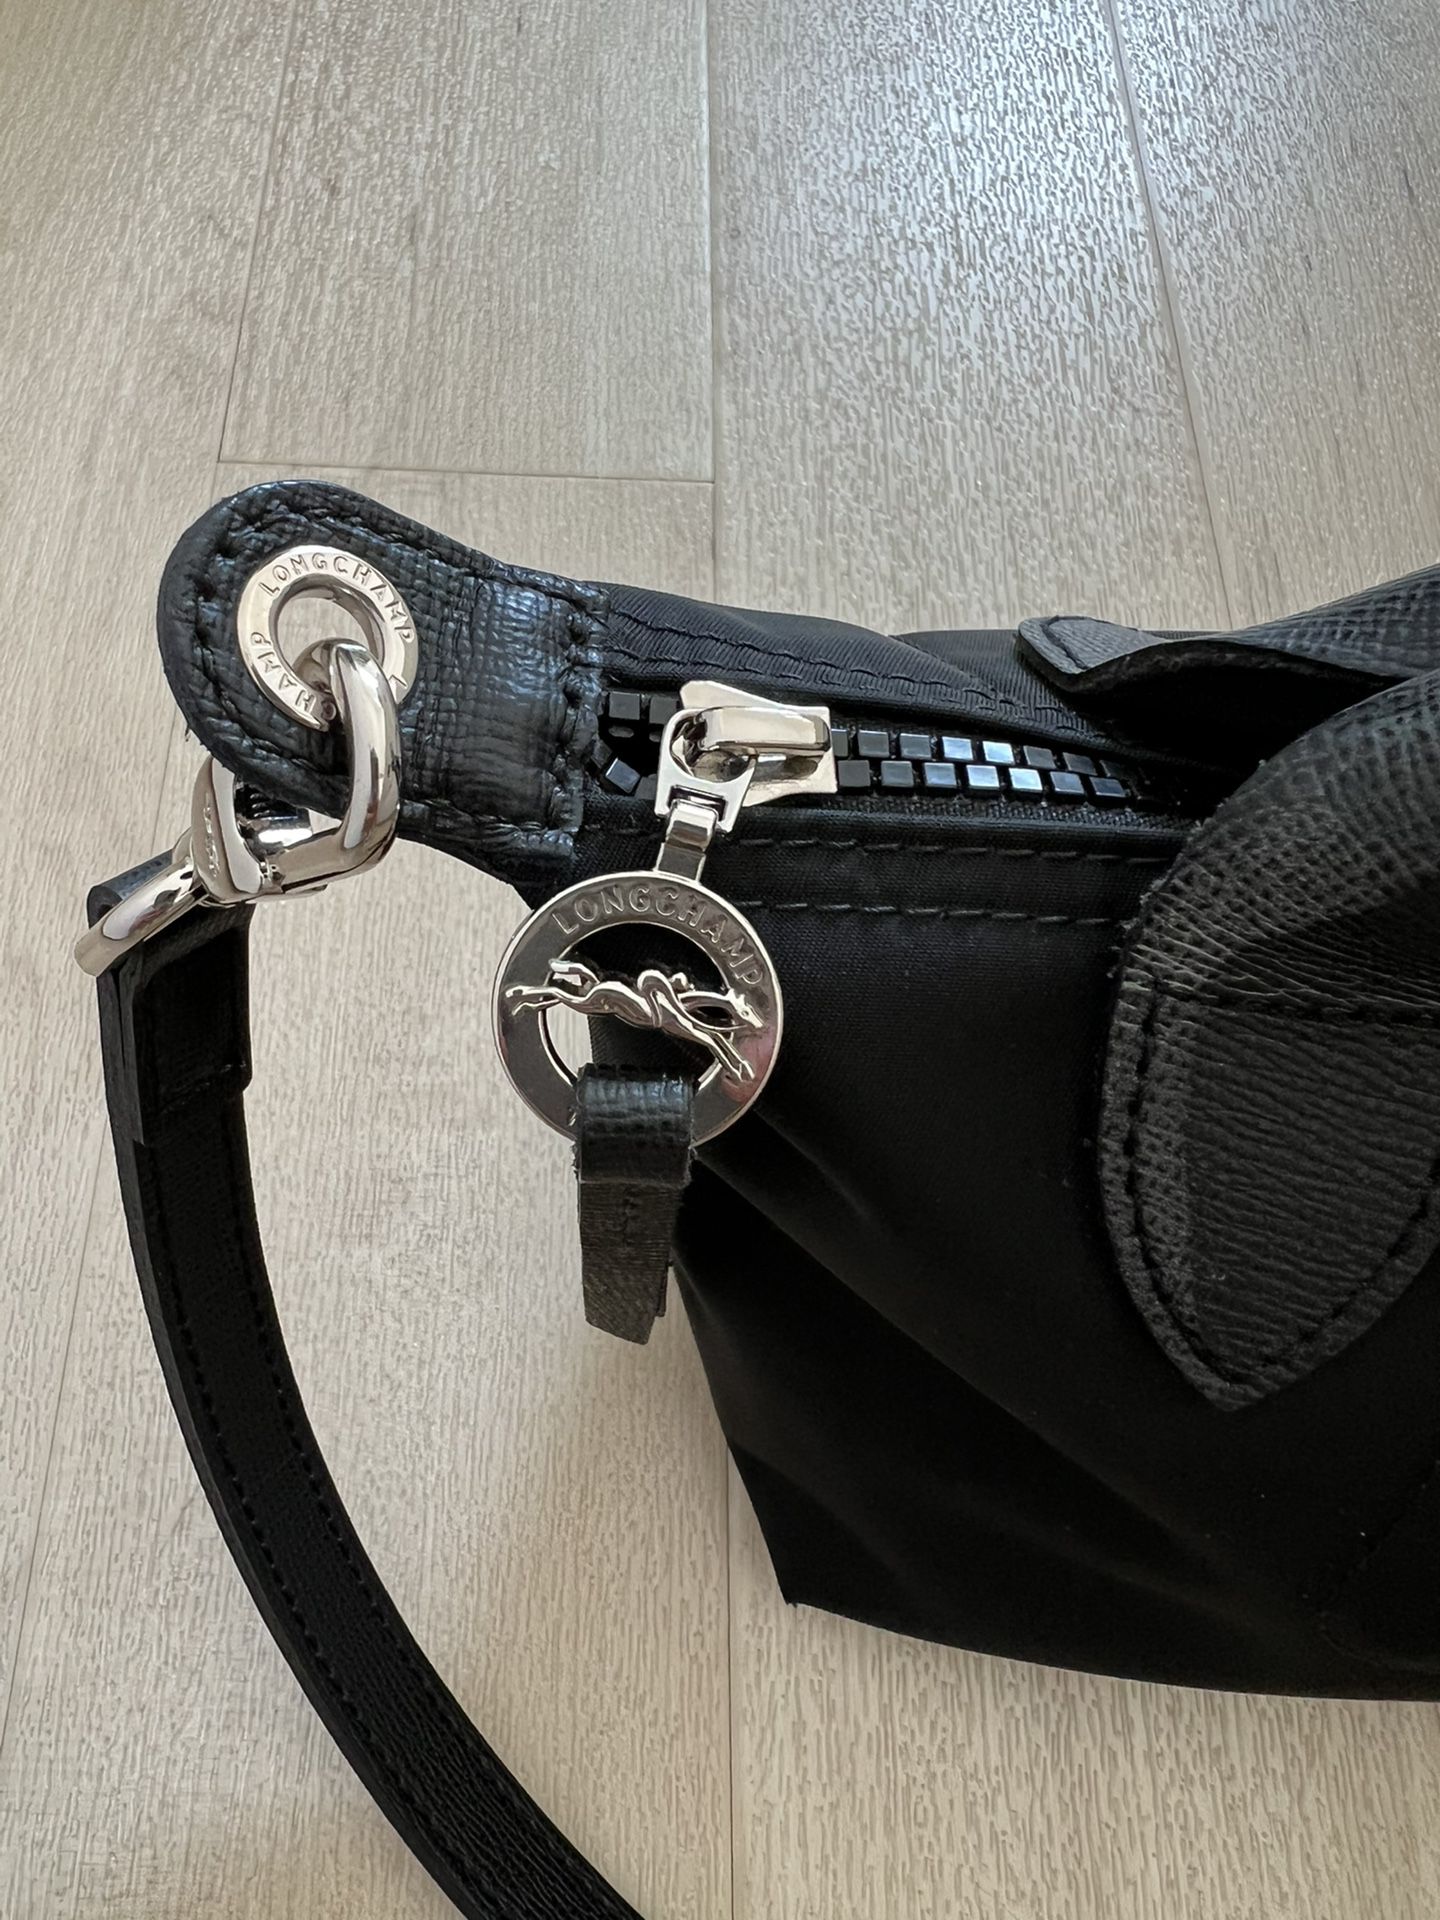 Longchamp Le Pliage Neo Extra Small Tote for Sale in Queens, NY - OfferUp